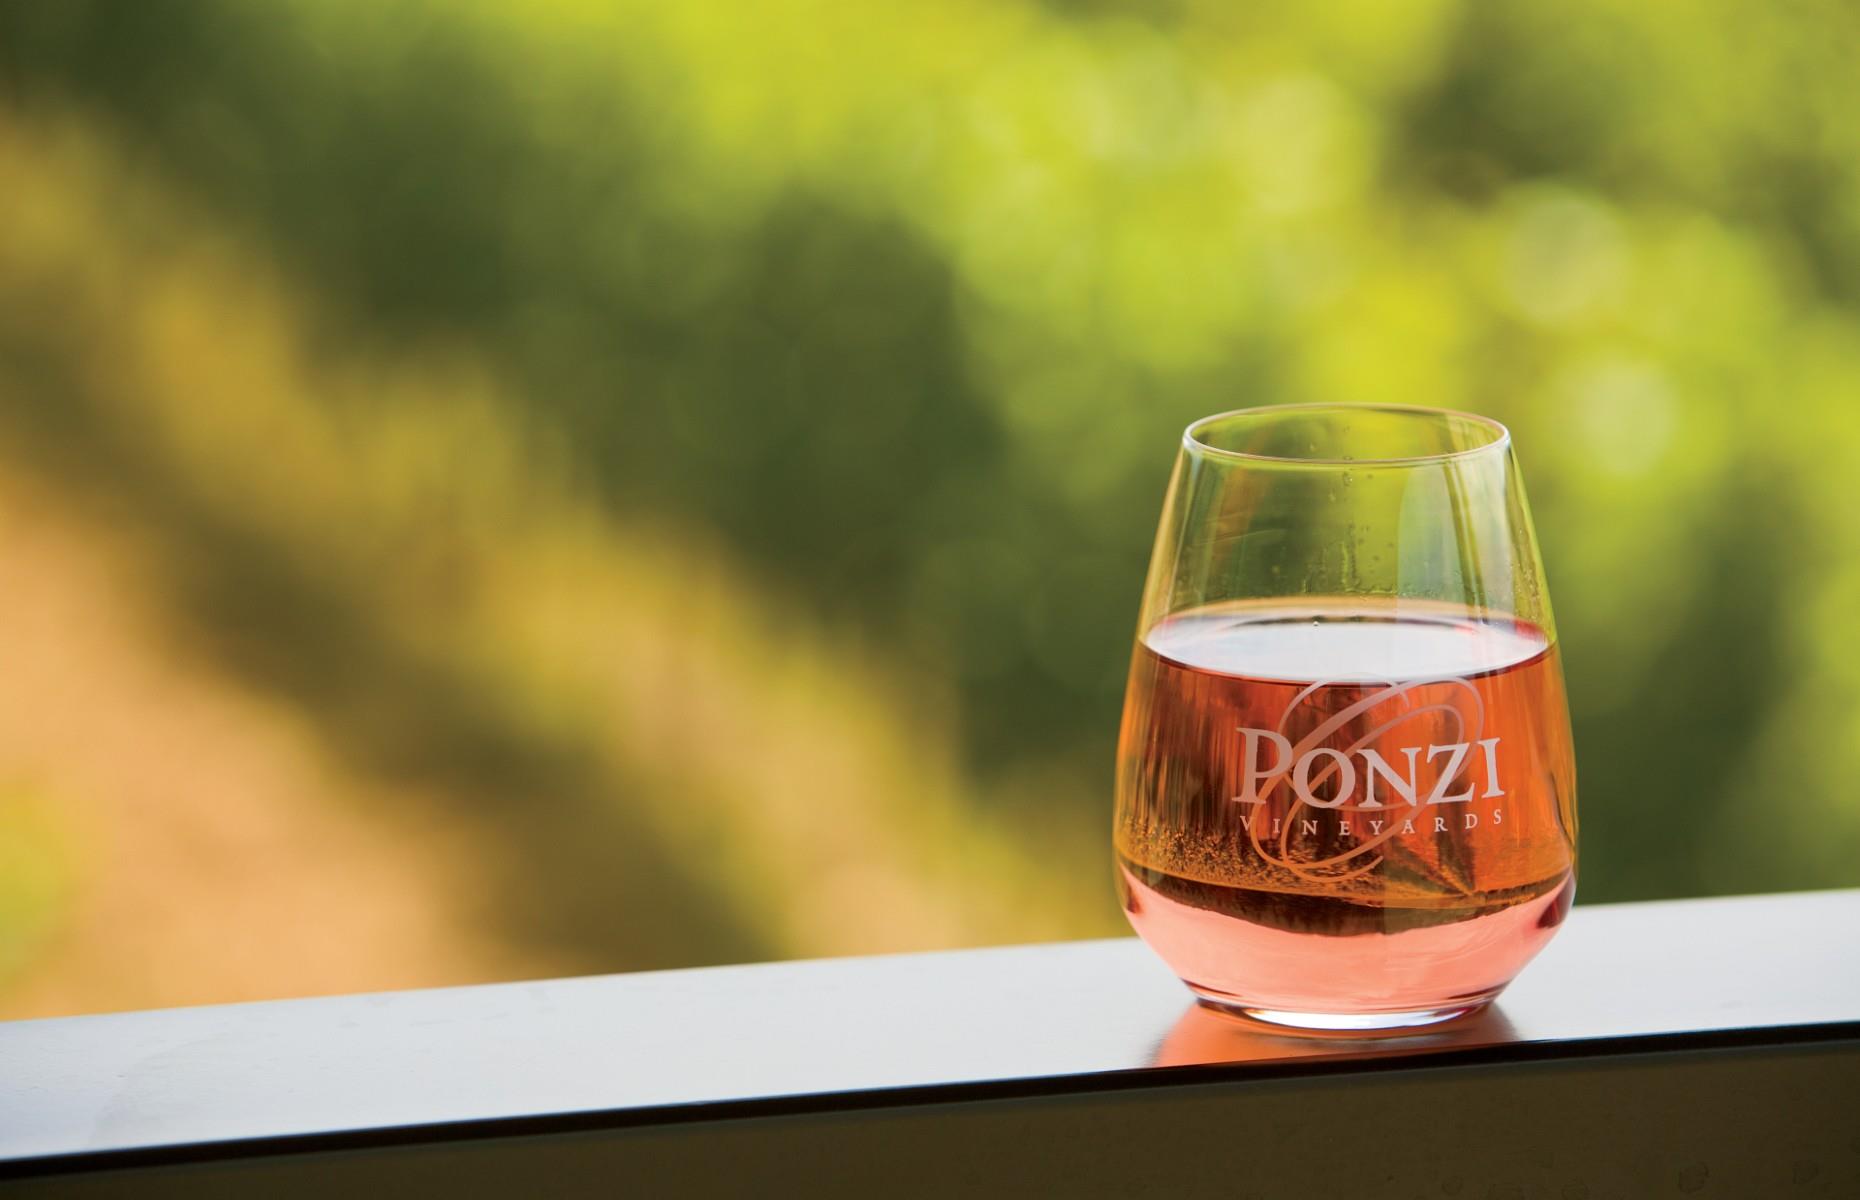 <p>Expect ultra-eco-friendly wines at Oregon’s Willamette Valley, where biodynamic and organic methods reign supreme. One of the best is family-run <a href="https://www.ponzivineyards.com/">Ponzi Vineyards</a>, which has been producing a range of award-winning bottles for more than 50 years and <a href="https://www.decanter.com/wine-news/bollinger-family-to-buy-oregon-winery-ponzi-456155/">was recently acquired by the family behind Champagne Bollinger</a>. For the full experience book onto a Signature Wine Tasting, where you’ll get to sample five current releases at their chic and modern tasting room, for $45 per head – the fee is waived if you spend more than $100 when you visit. </p>